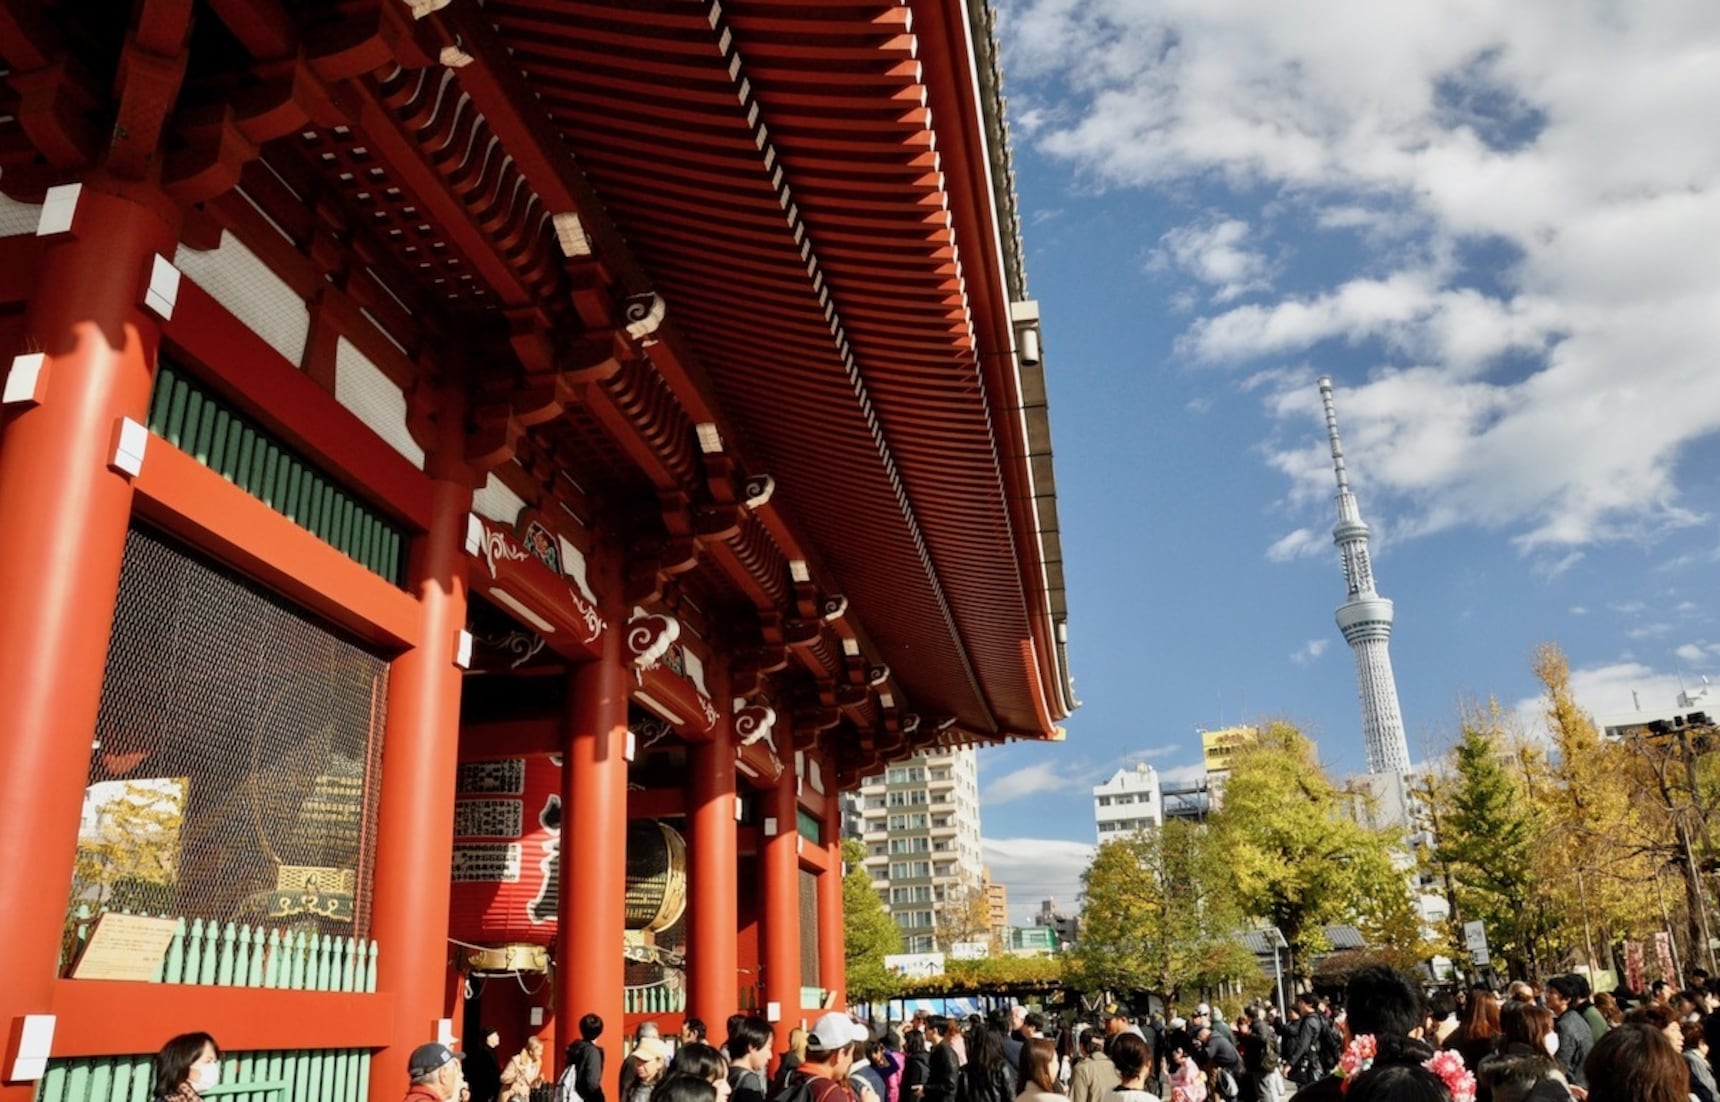 How to Get the Most out of Senso-ji Temple